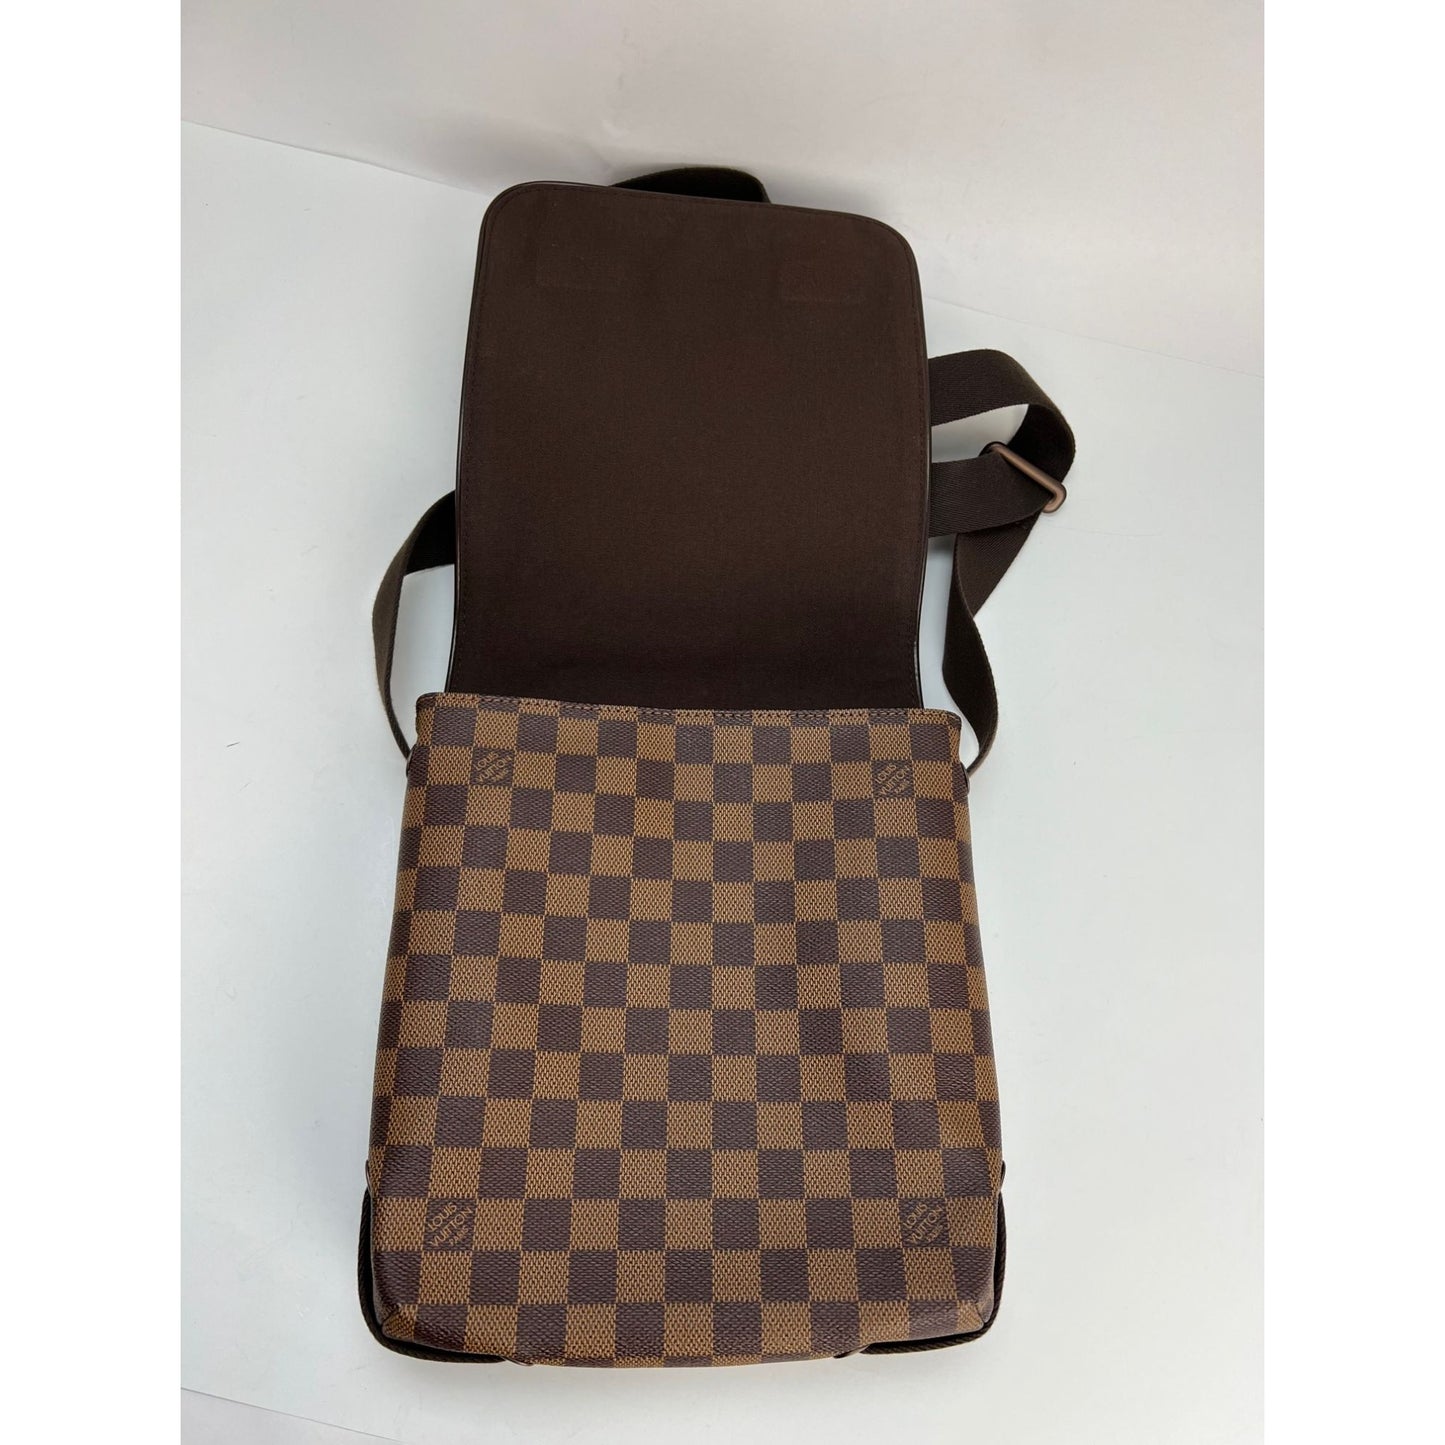 Louis+Vuitton+Brooklyn+Messenger+Bag+PM+Brown+Leather for